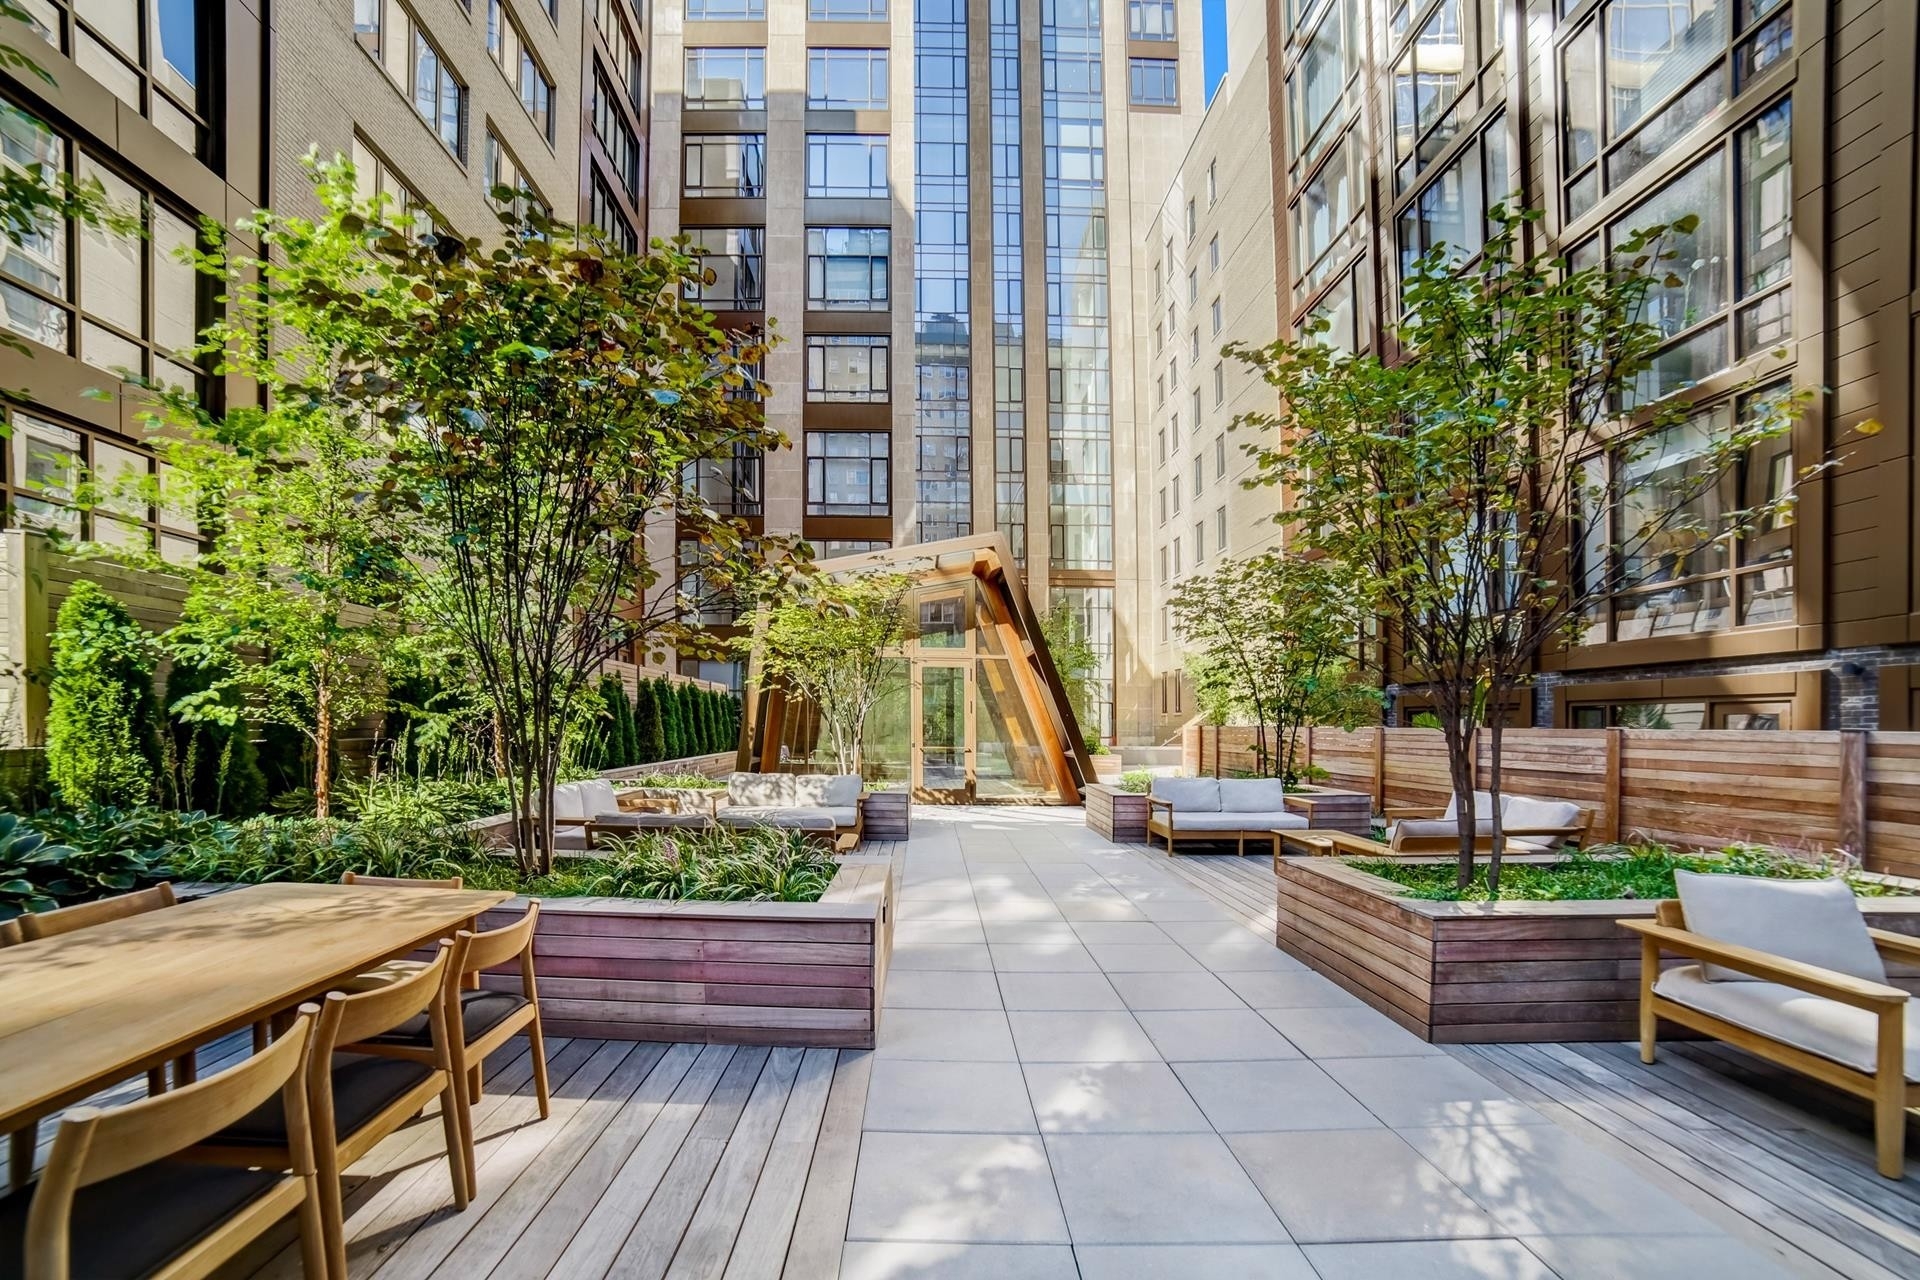 9. Condominiums for Sale at Gramercy Square, 215 E 19TH ST, 7A Gramercy Park, New York, NY 10003